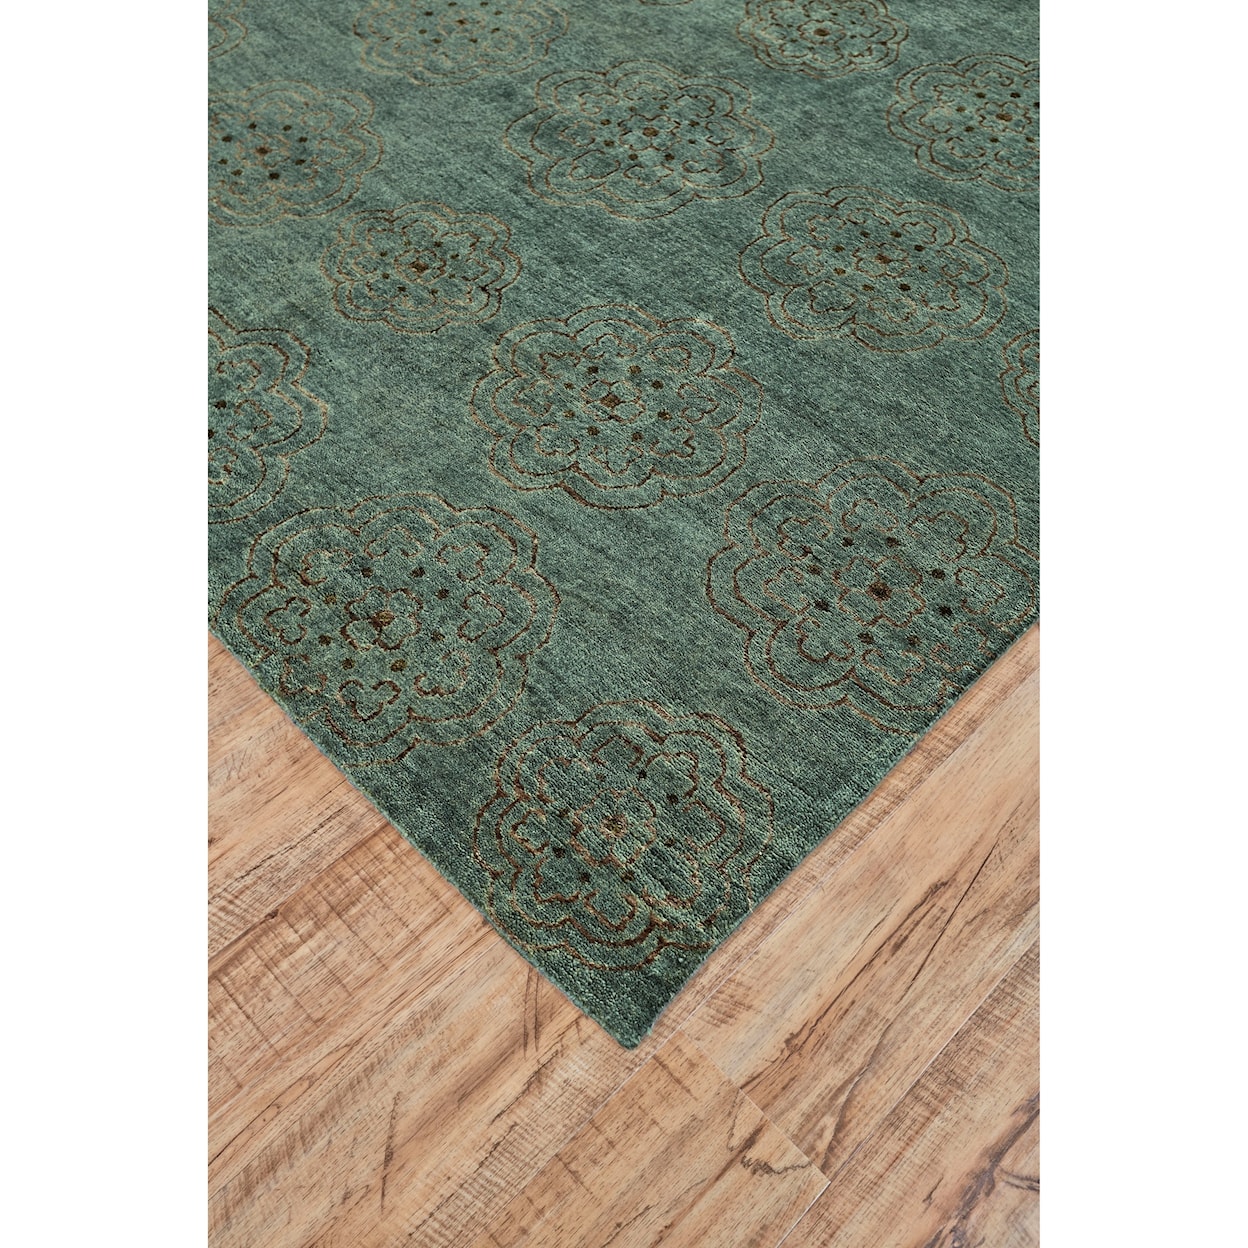 Feizy Rugs Qing Teal 2' x 3' Area Rug